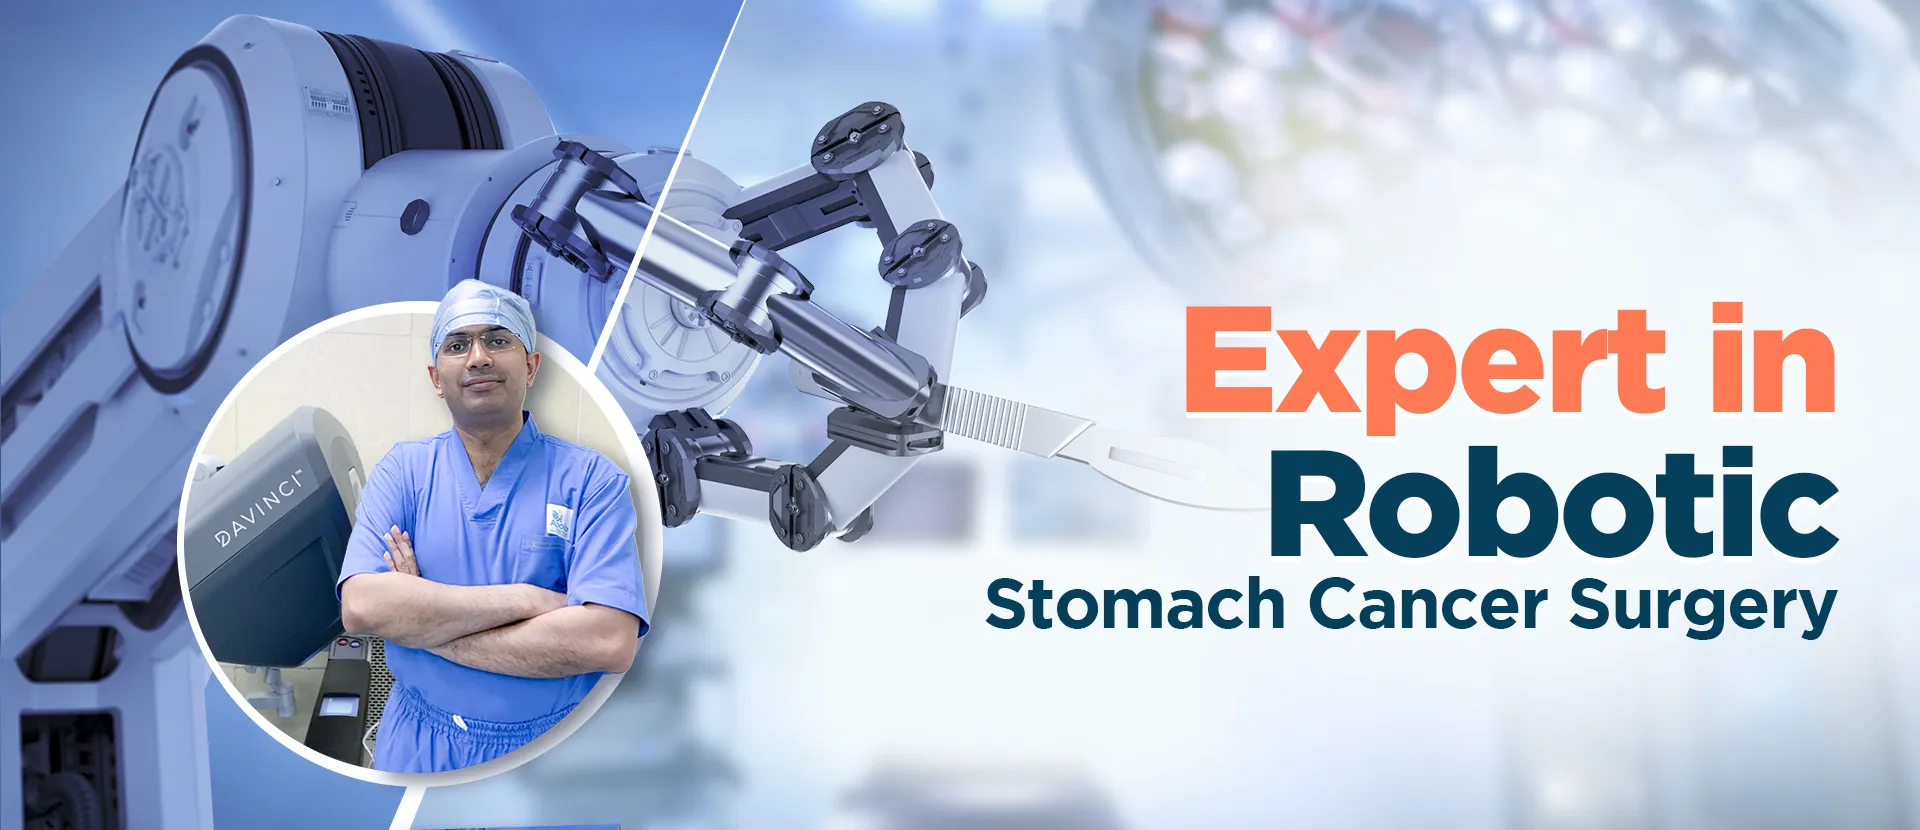 best robotic stomach cancer surgery by robotic stomach cancer surgeon in Ahmedabad, India